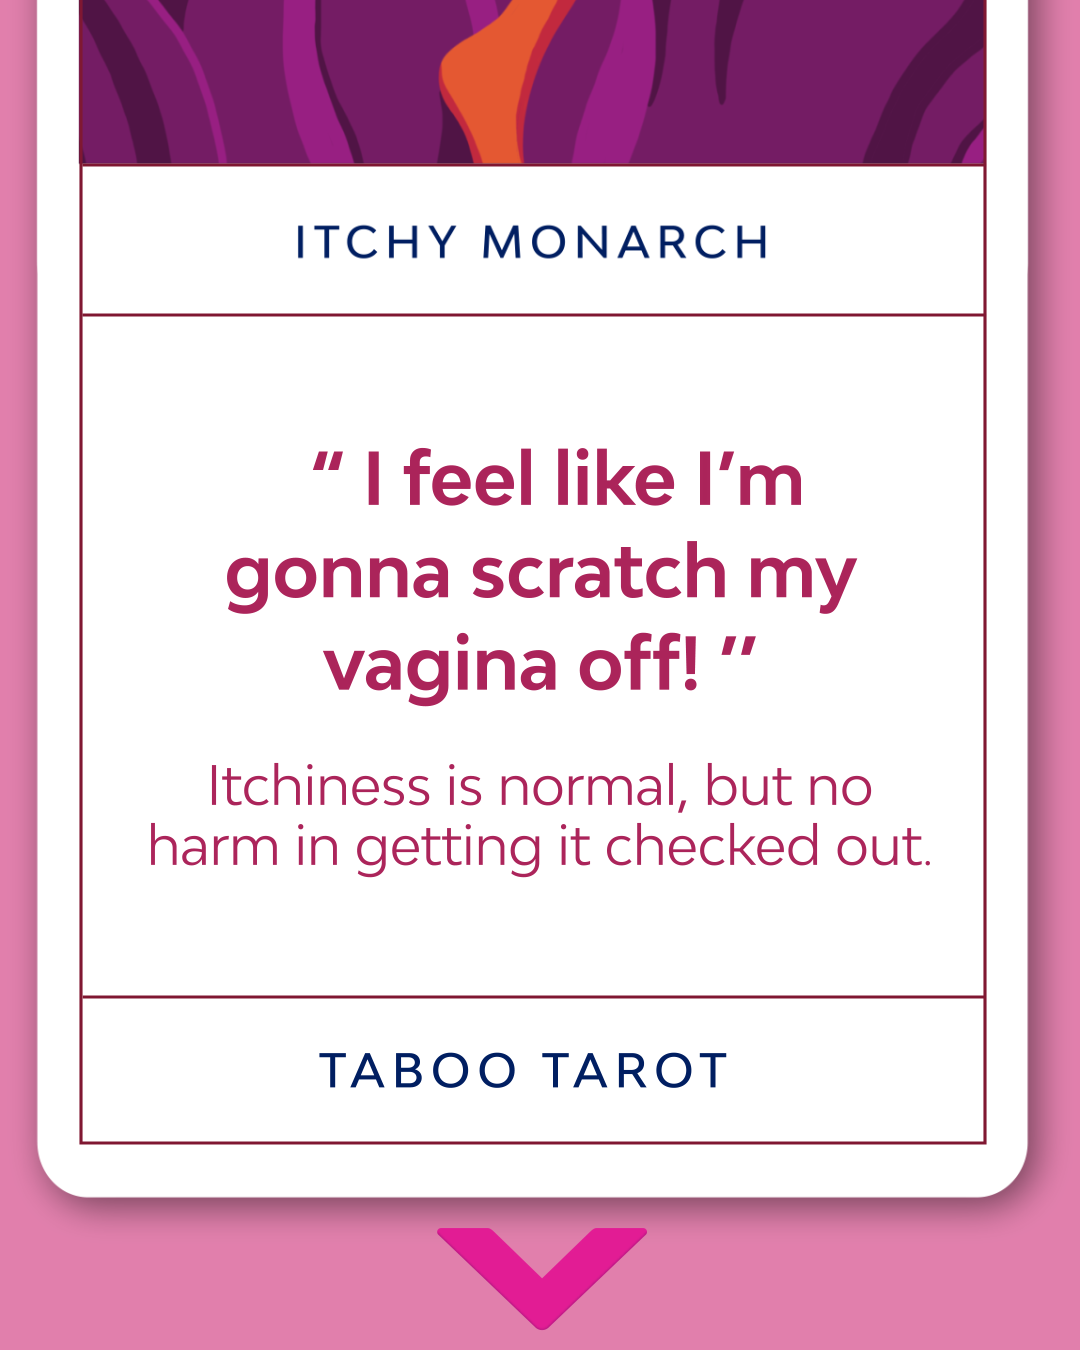 The_Taboo_Static_Card_No.13_Itchy Monarch_4x5_02